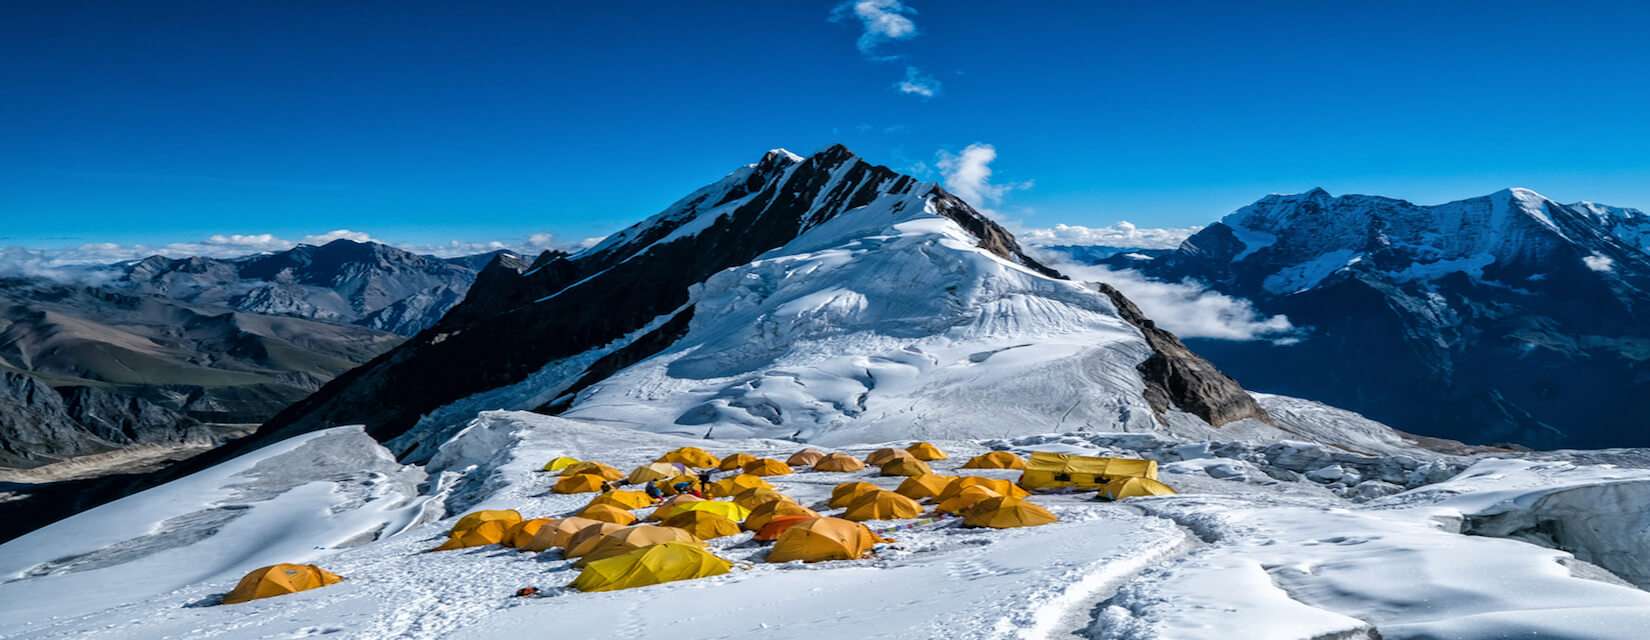 Expedition Nepal